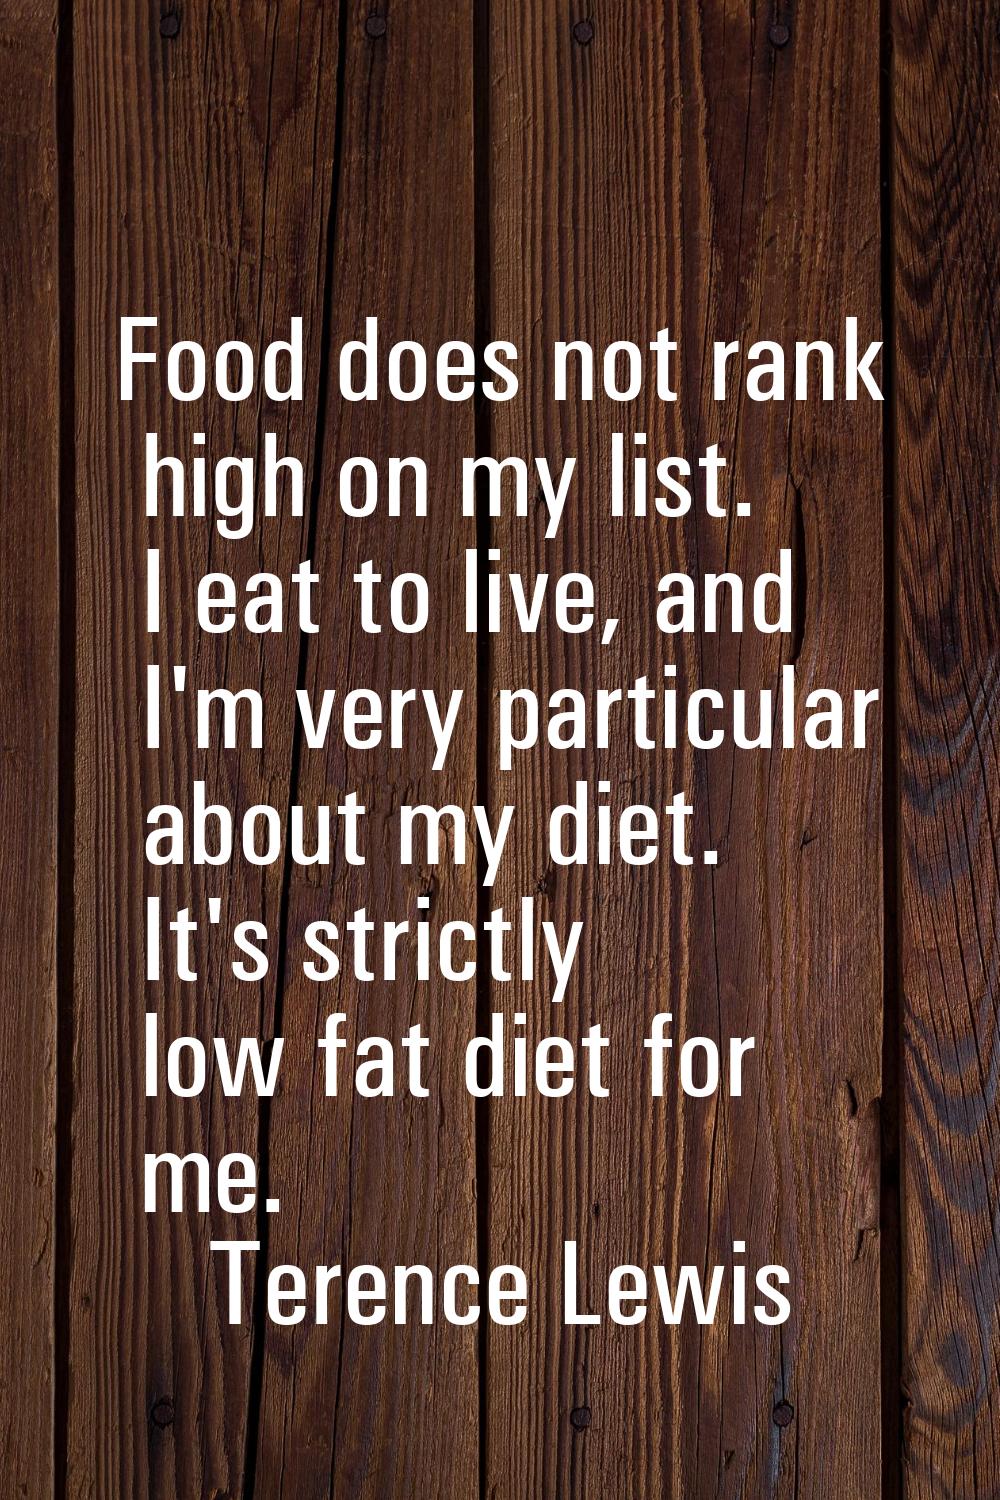 Food does not rank high on my list. I eat to live, and I'm very particular about my diet. It's stri